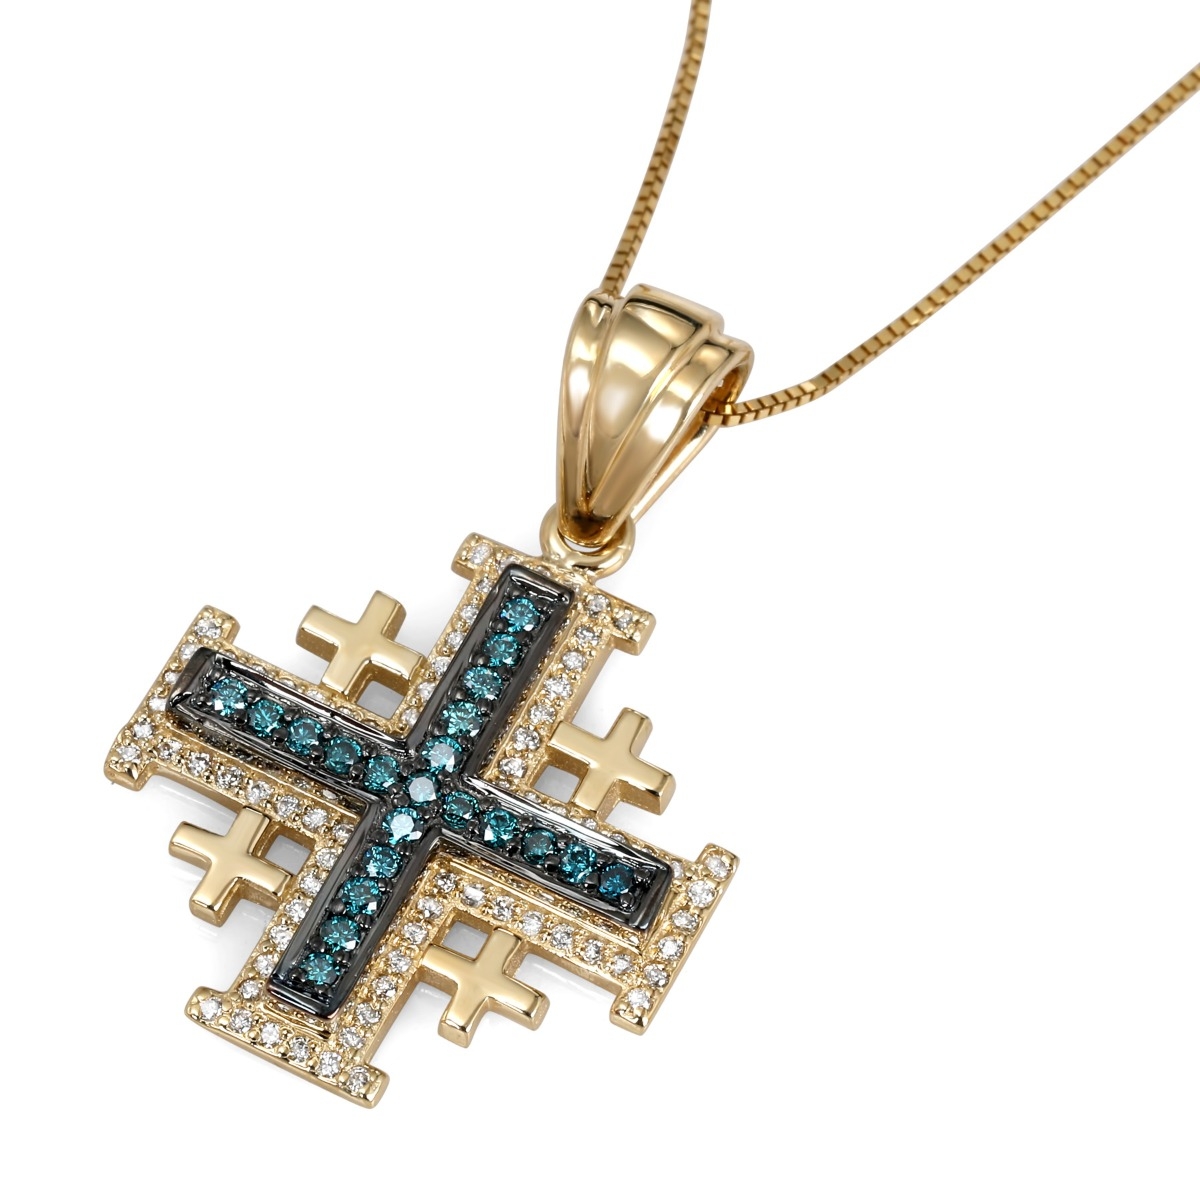 Anbinder Deluxe 14K Yellow & Black Gold Jerusalem Cross Pendant with  Diamond Border and Blue Diamond Accents